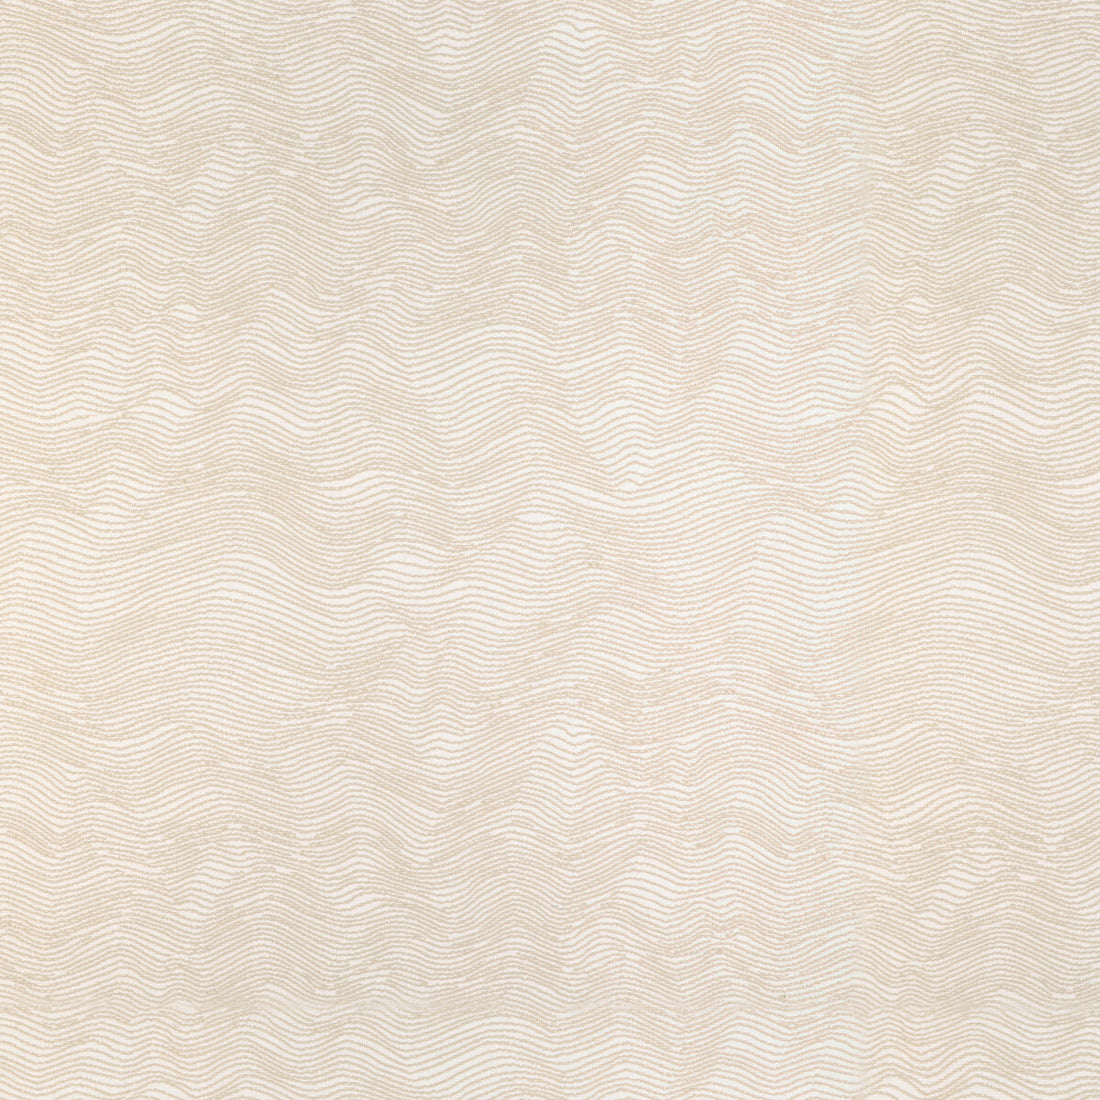 Watery Motion fabric in oat color - pattern 37056.16.0 - by Kravet Design in the Thom Filicia Latitude collection